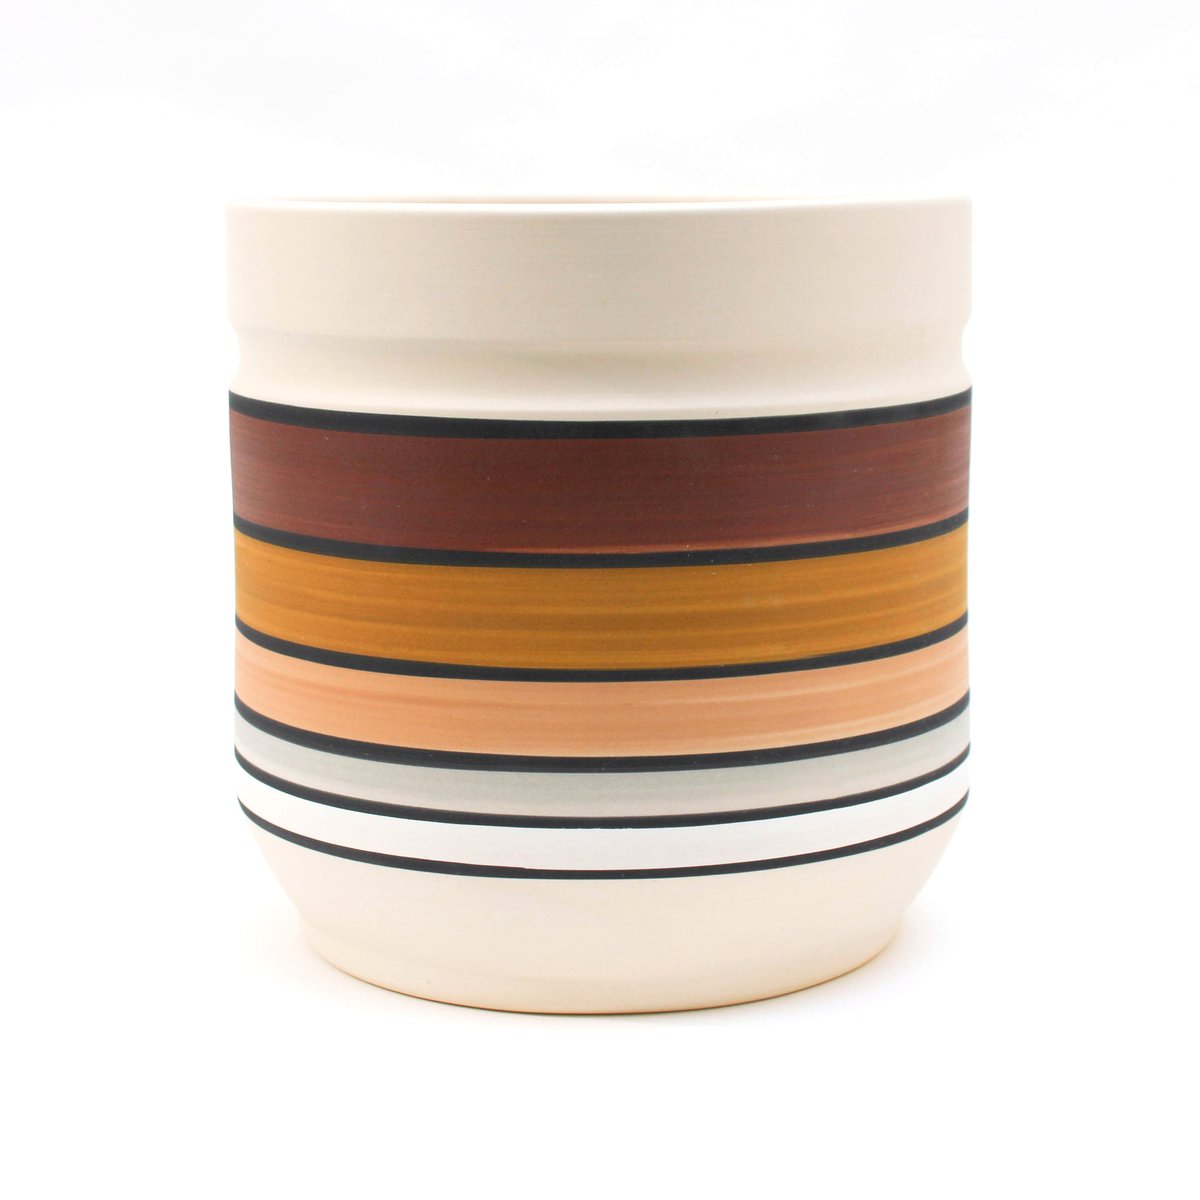 Desert Planter: A large cylindrical planter which is unglazed and painted with horizontal stripes. Each large stripe is a different color, with thinner black stripes dividing each color. From top to bottom: white, dark brown, dark tan, beige, light grey, and white.